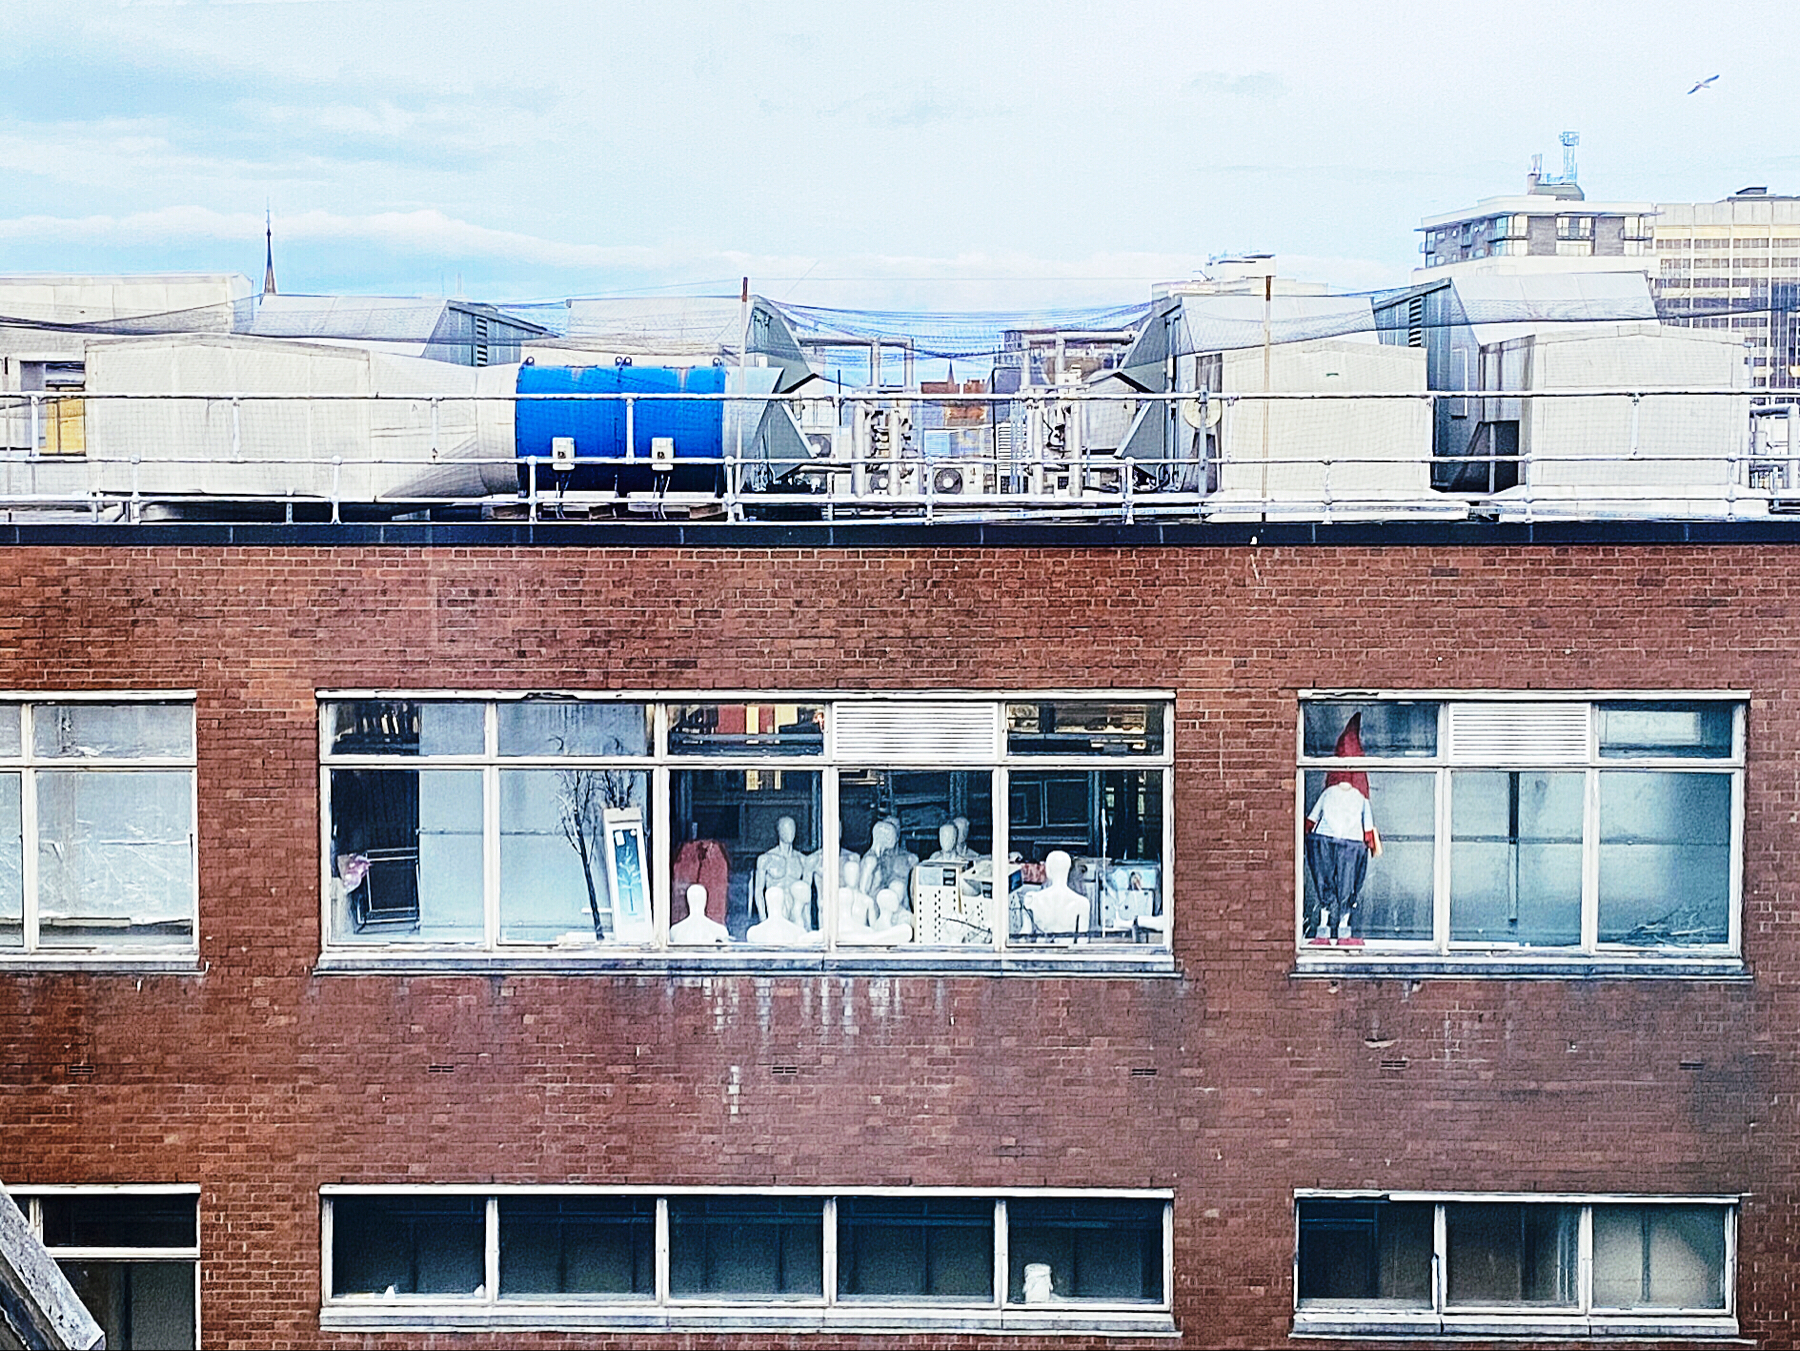 View into an office building window behind which is a group of mannequins